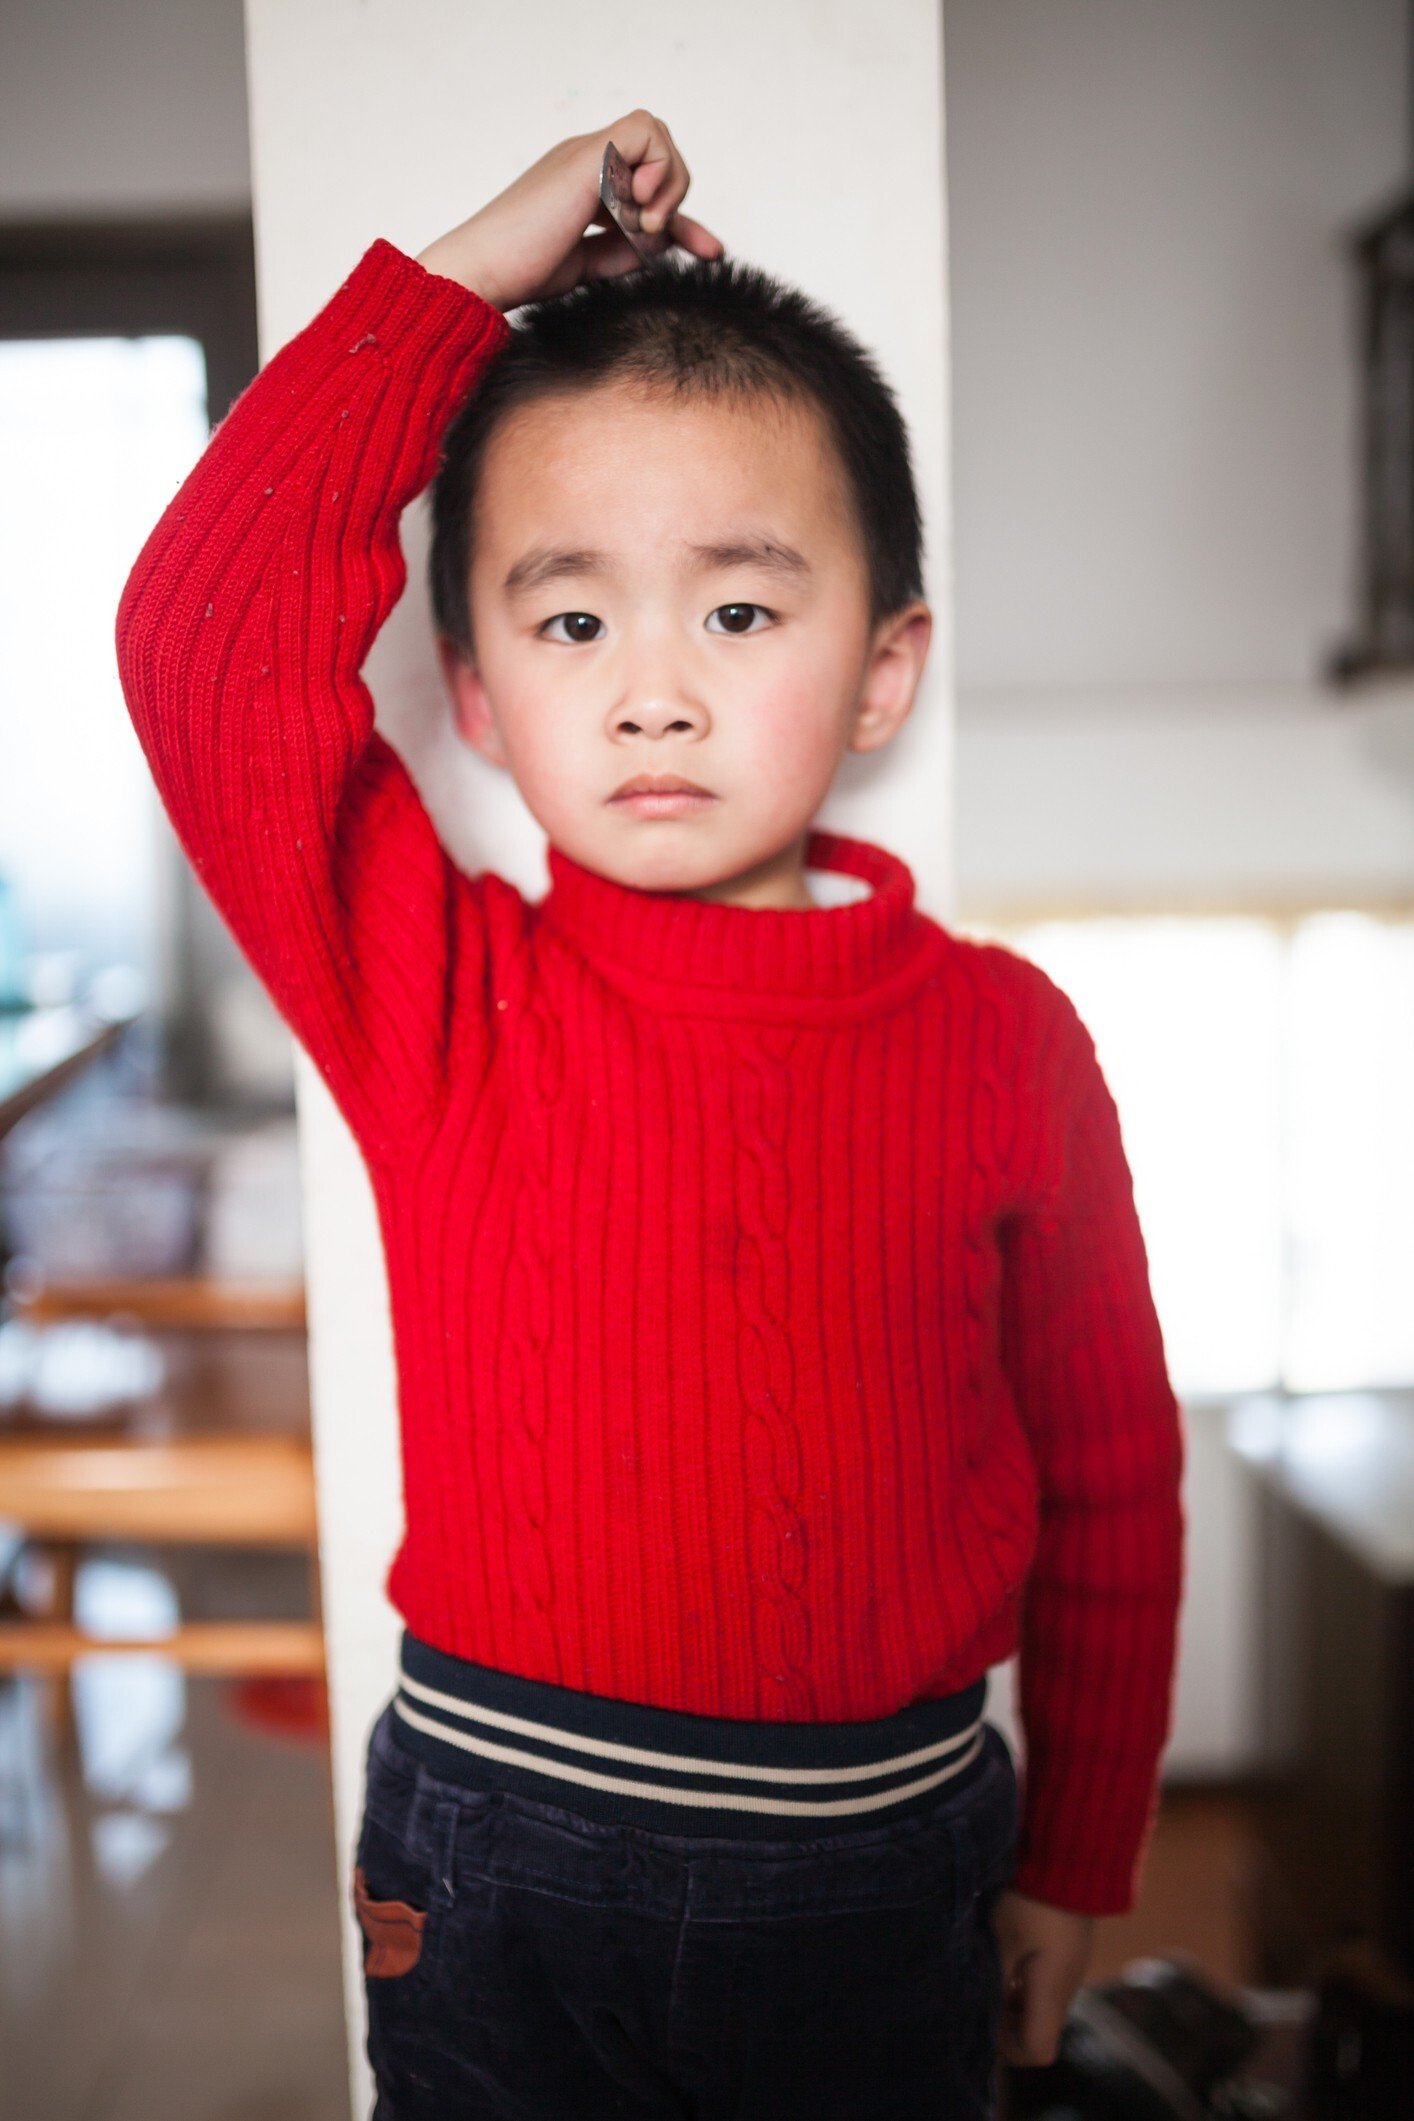 The economic development in China in the past four decades has reduced childhood malnutrition. Photo: Getty Images